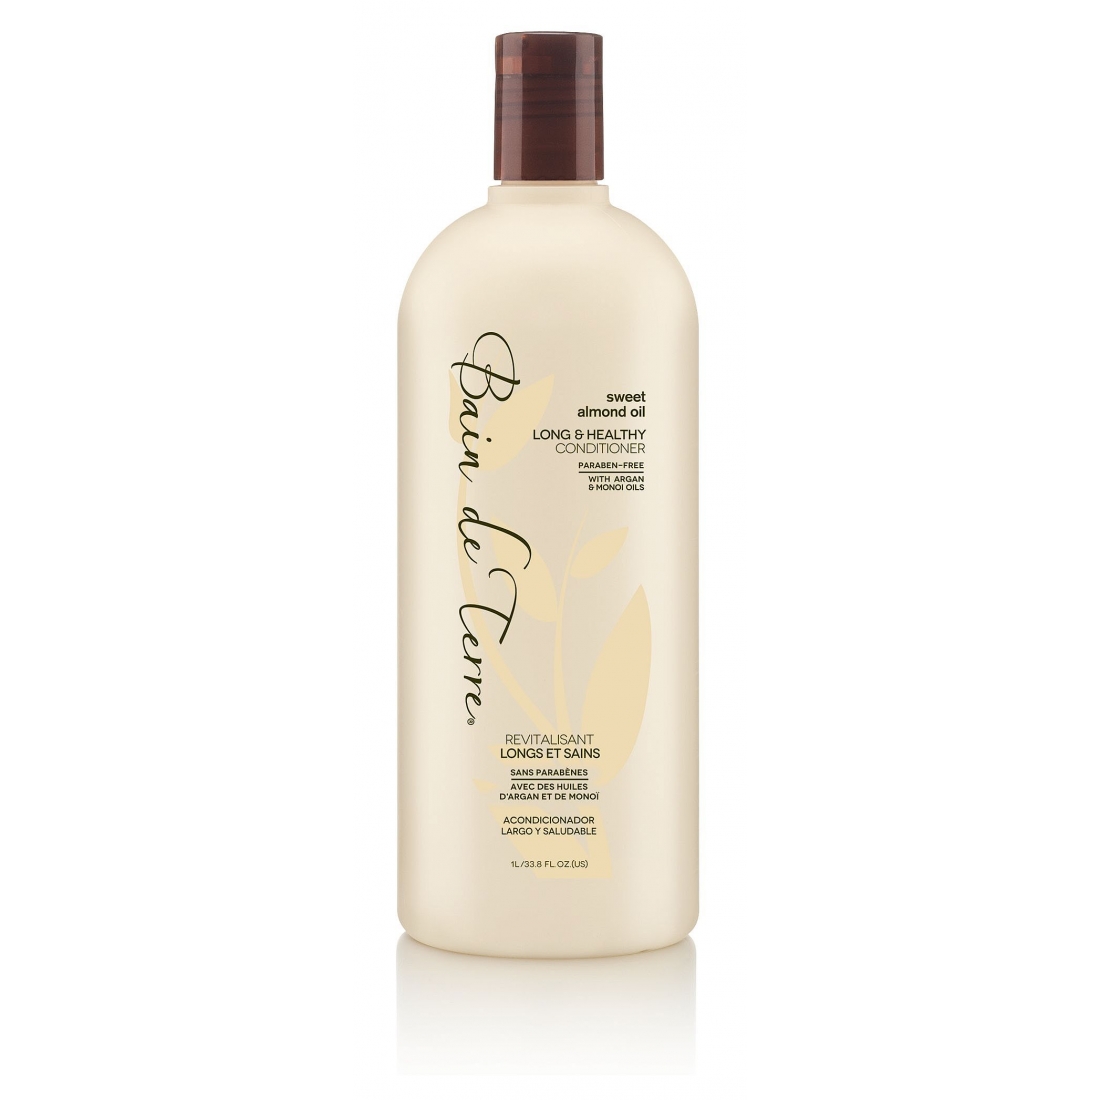 'Long and healthy' Conditioner - 1 L